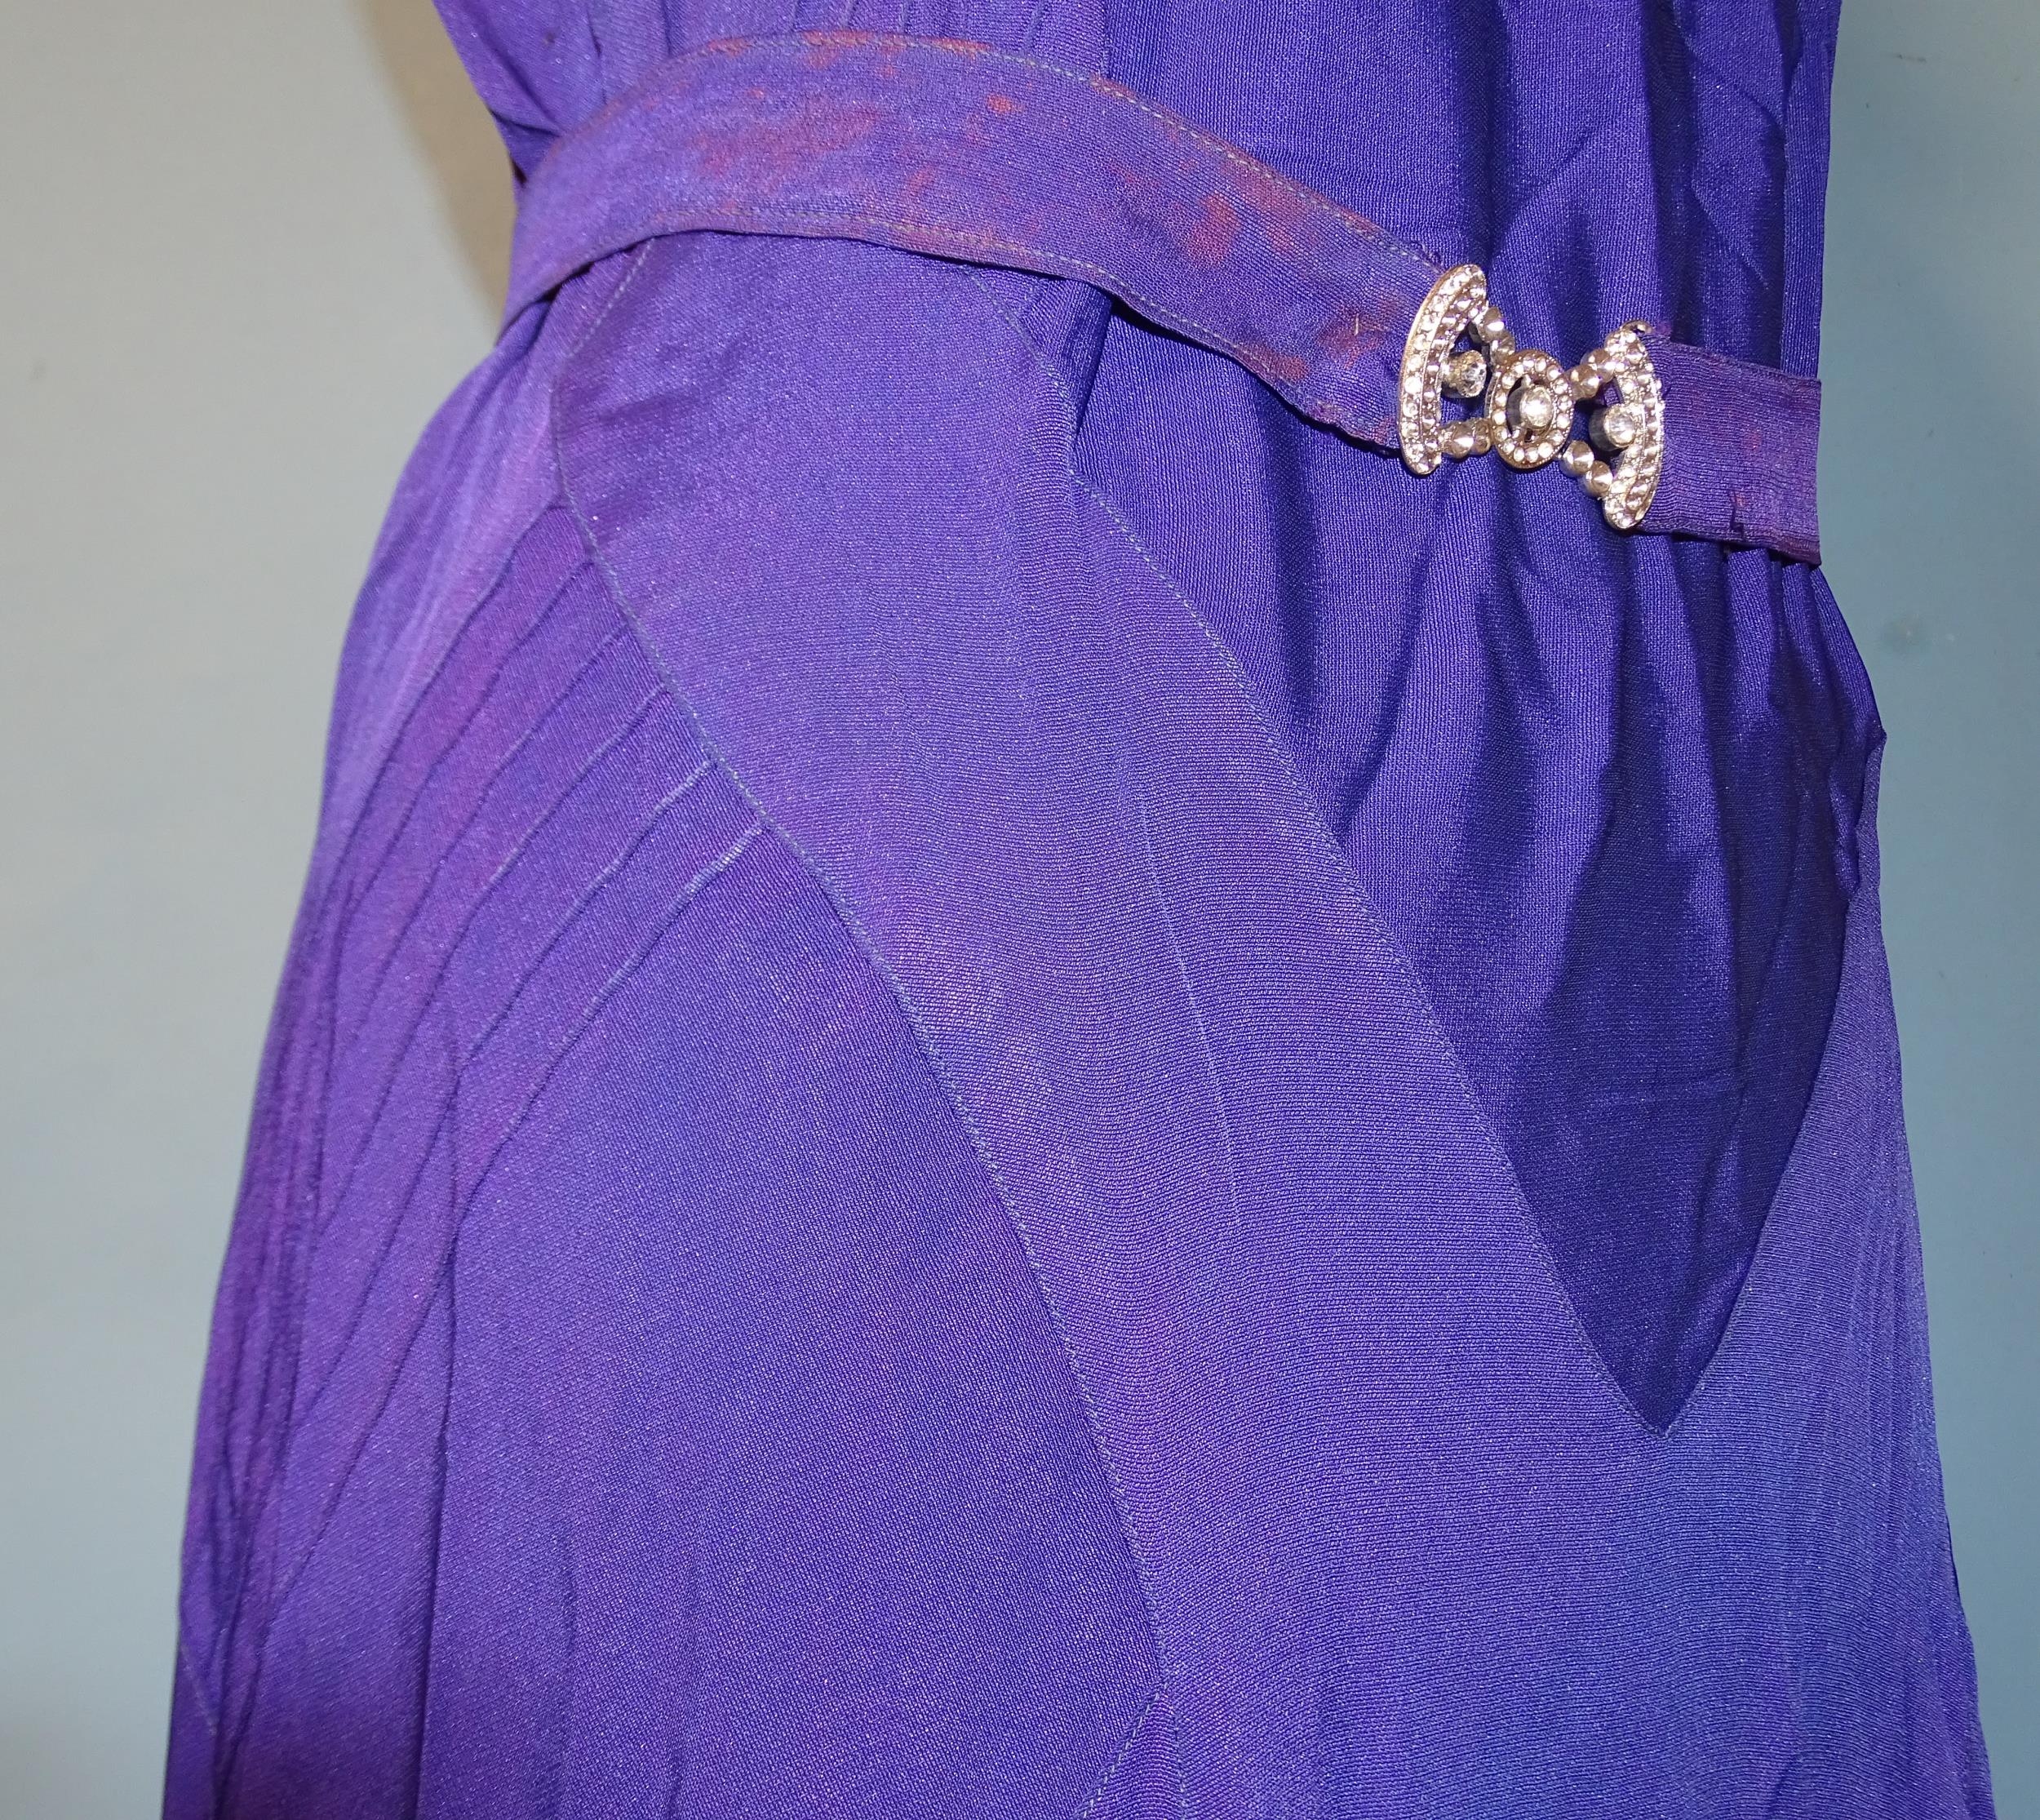 A 1930's evening dress of purple satin-like material, sleeveless, with hand-beading to neckline, the - Image 3 of 5